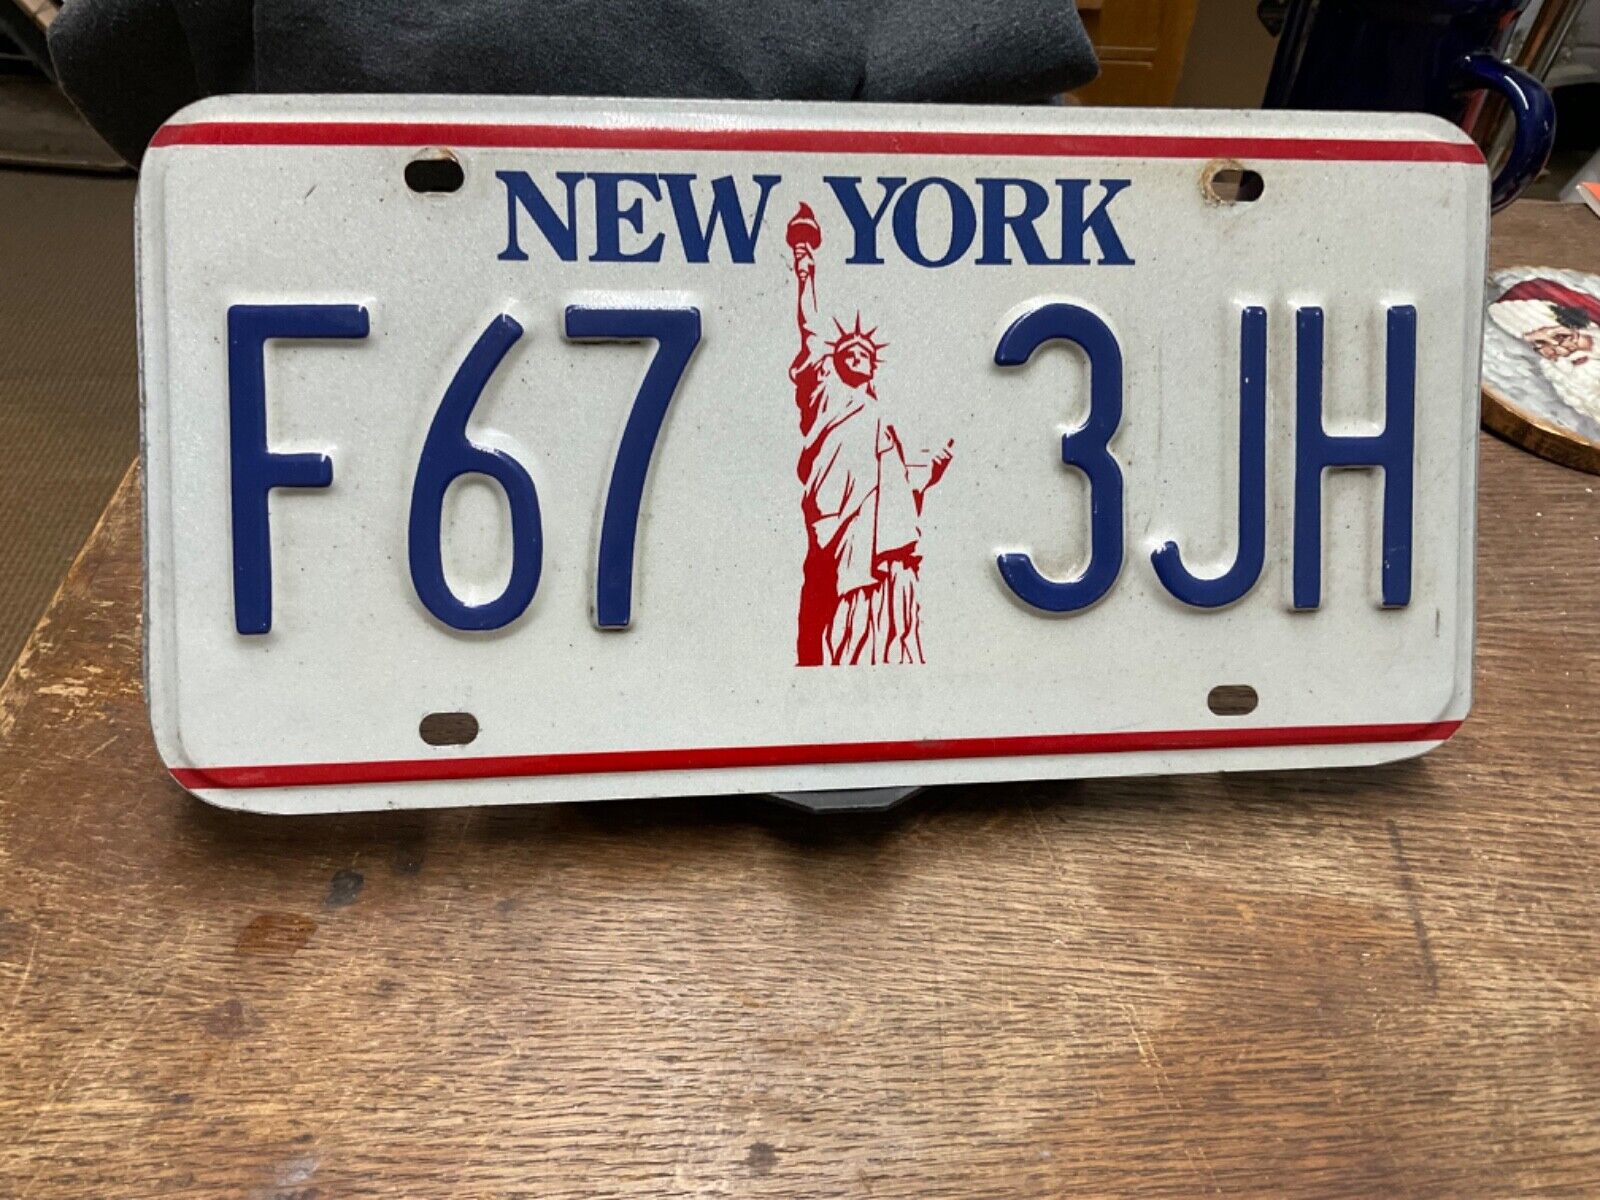 License Plate Vintage New York NY F67 3JH “Statue Of Liberty” Rustic